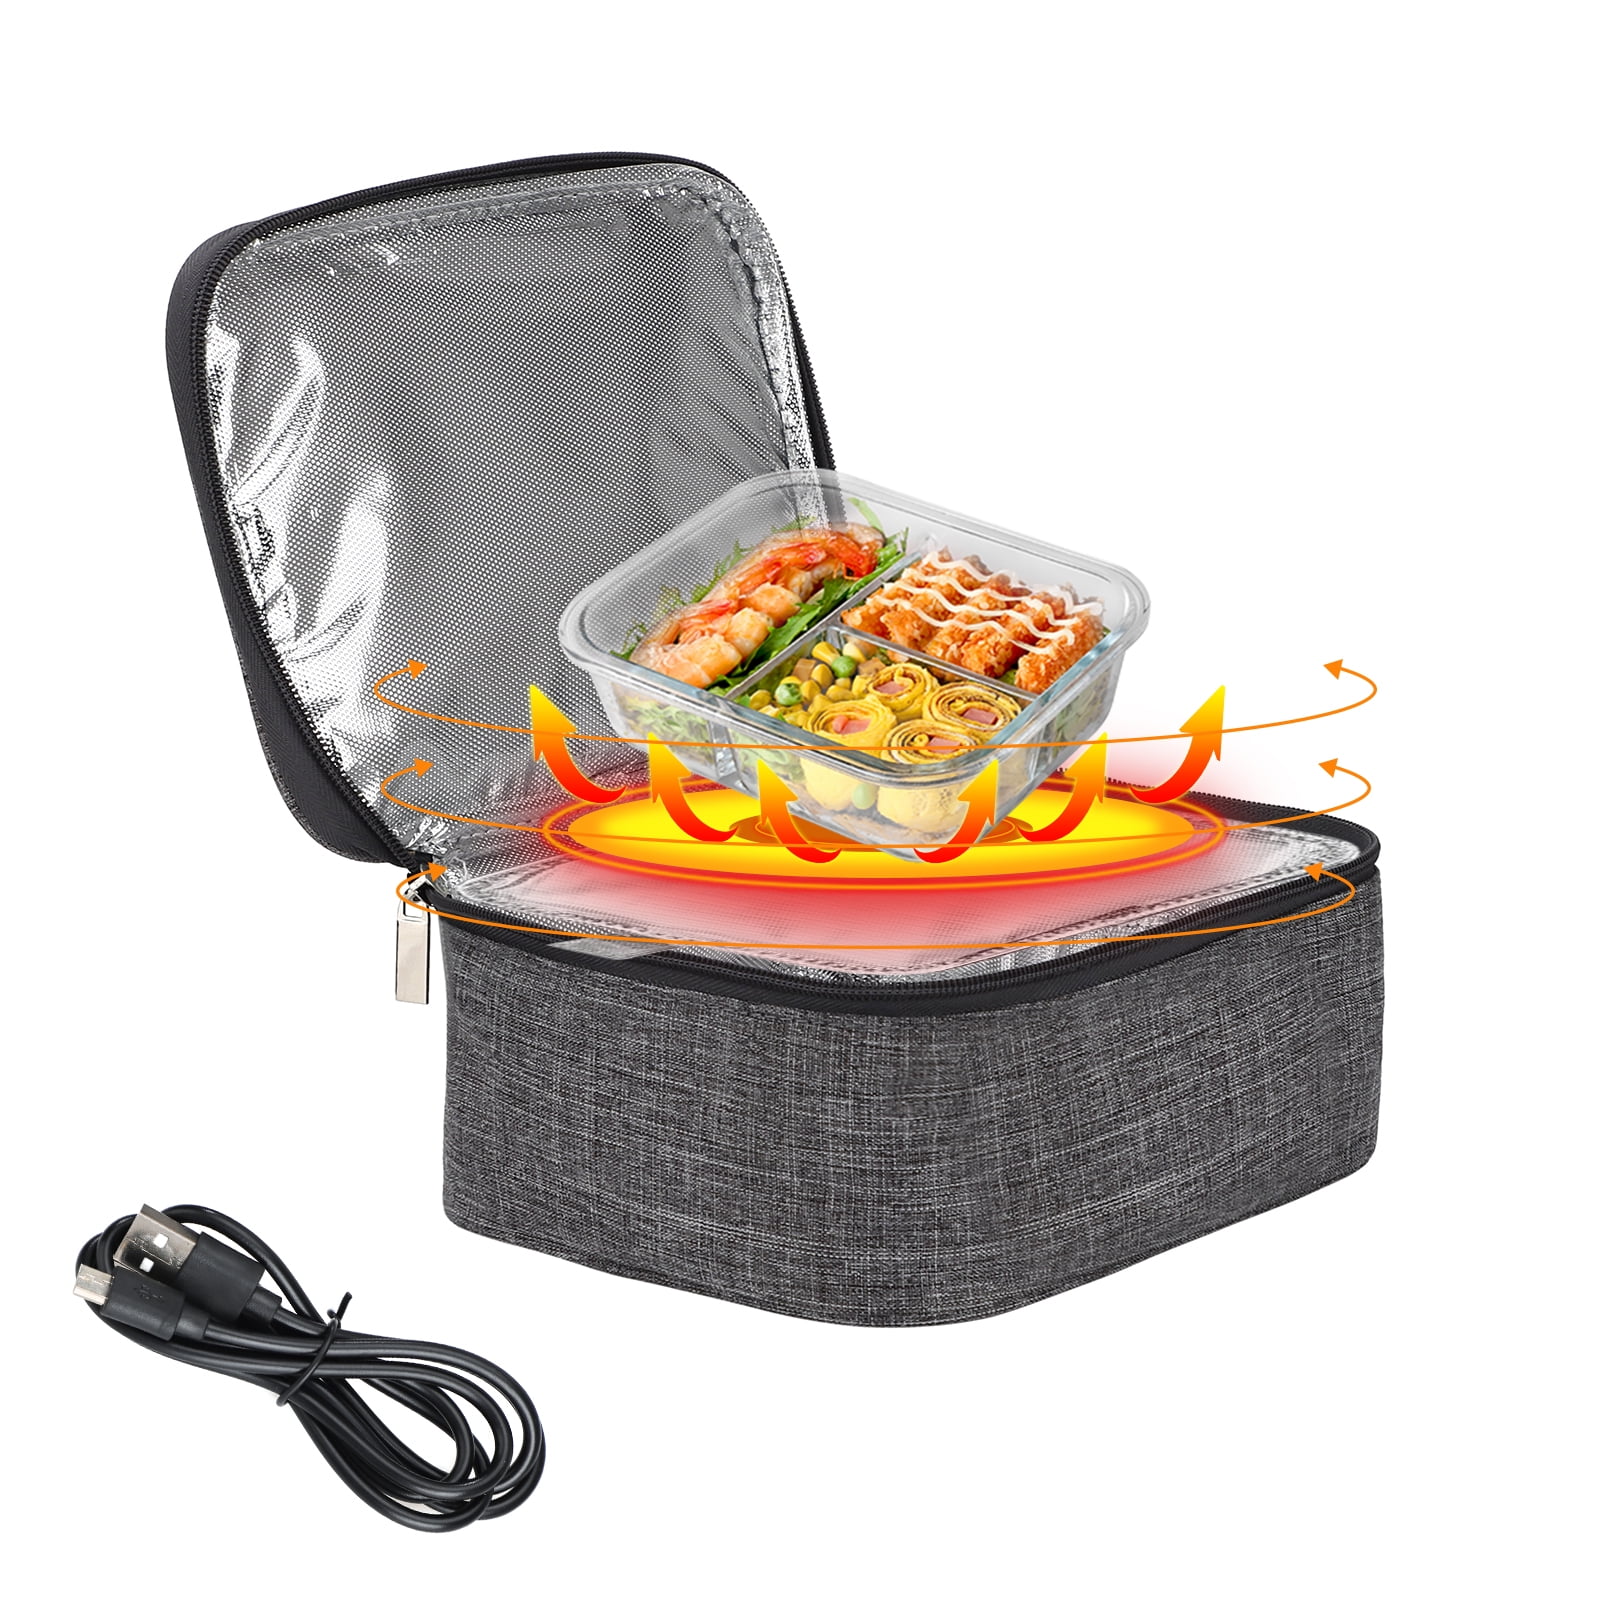 Skywin Portable Oven and Lunch Warmer - Personal Food Warmer for reheating  meals at work without an office microwave - Walmart.com